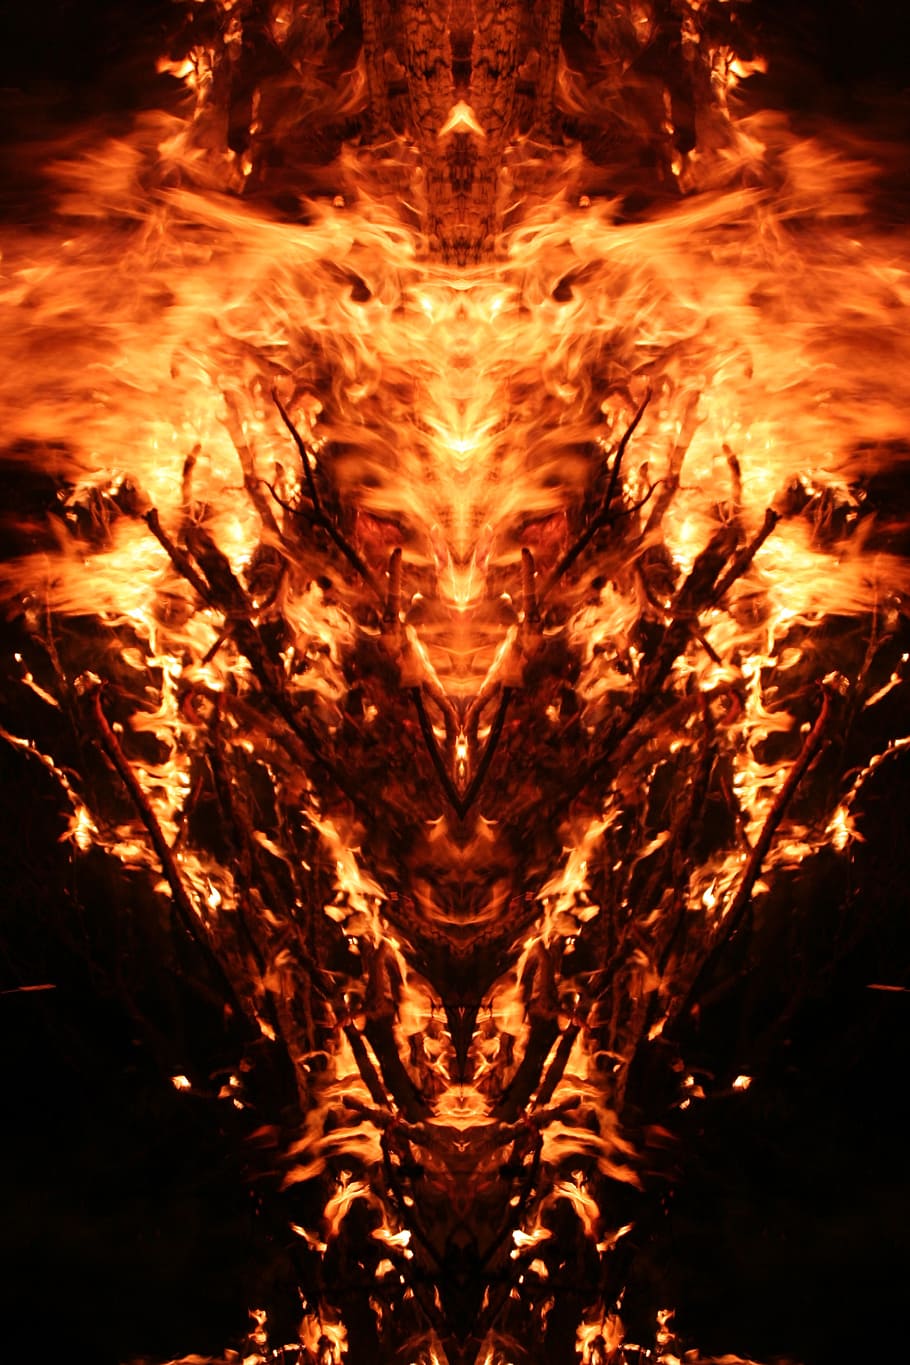 dragon flame poster, mirroring, fire, mystical, creature, heat, flame, embers, hot, campfire